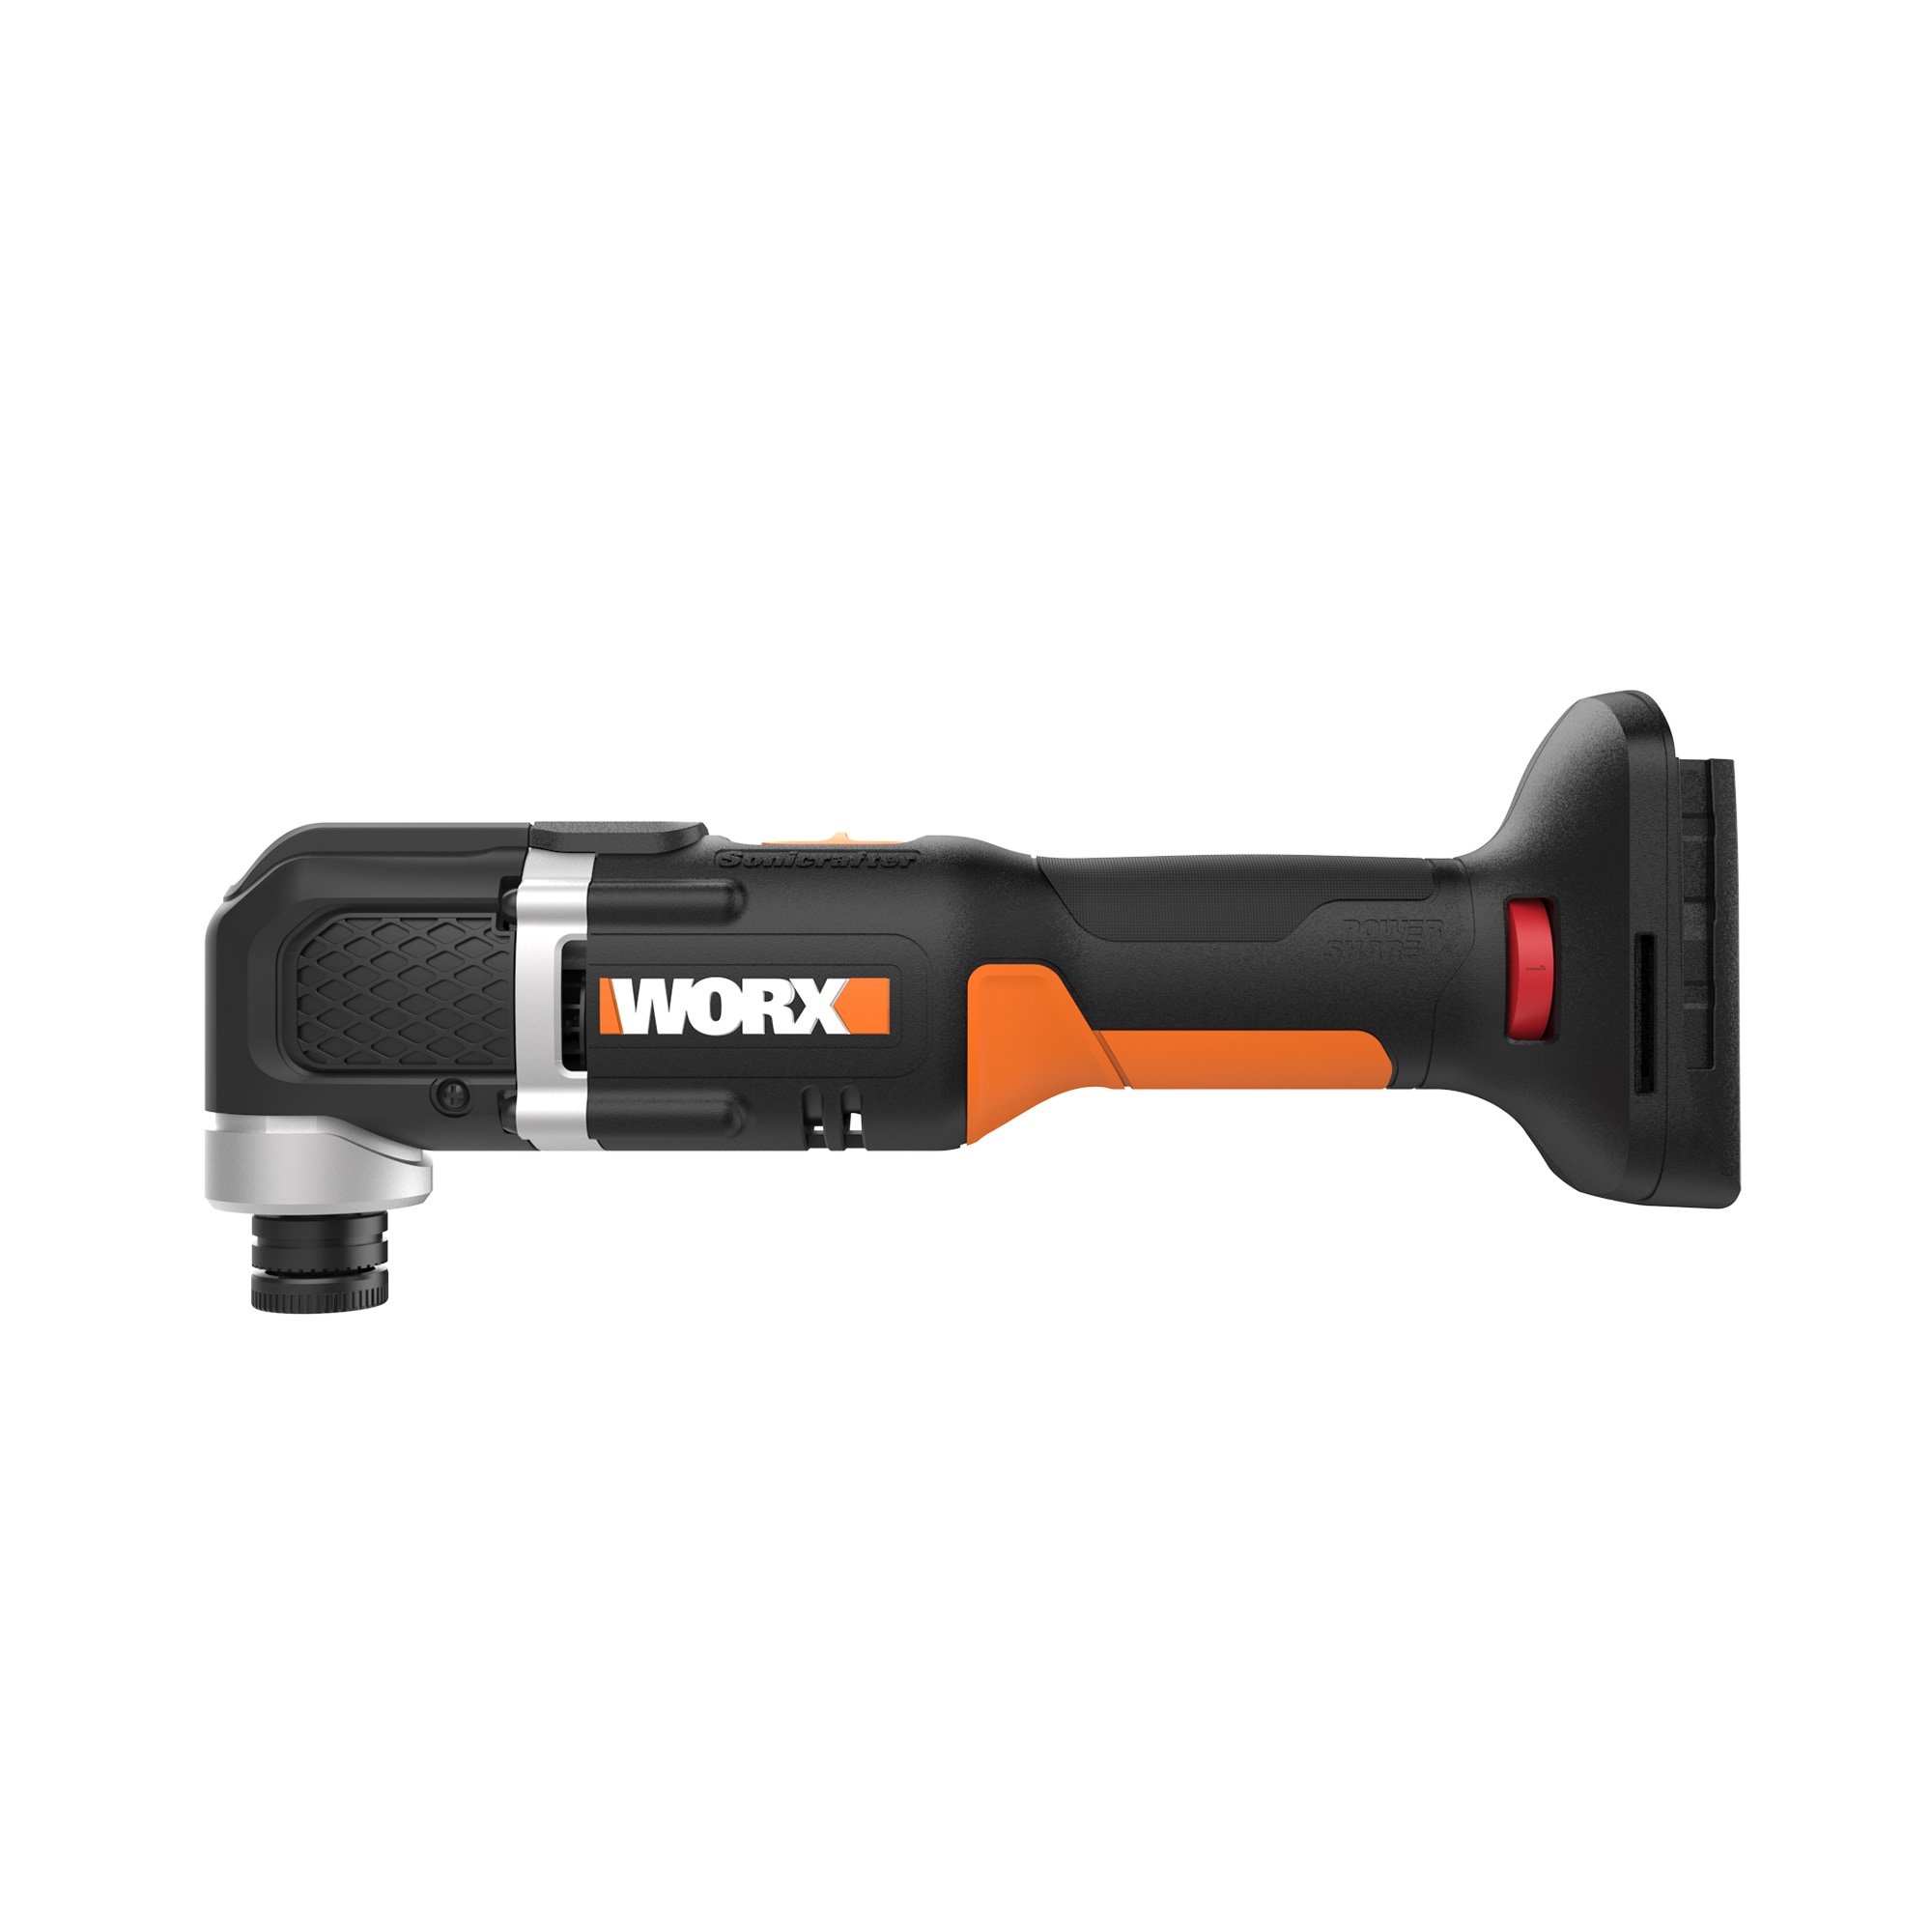 WORX Power Share Cordless Variable Speed Oscillating Multi-Tool in